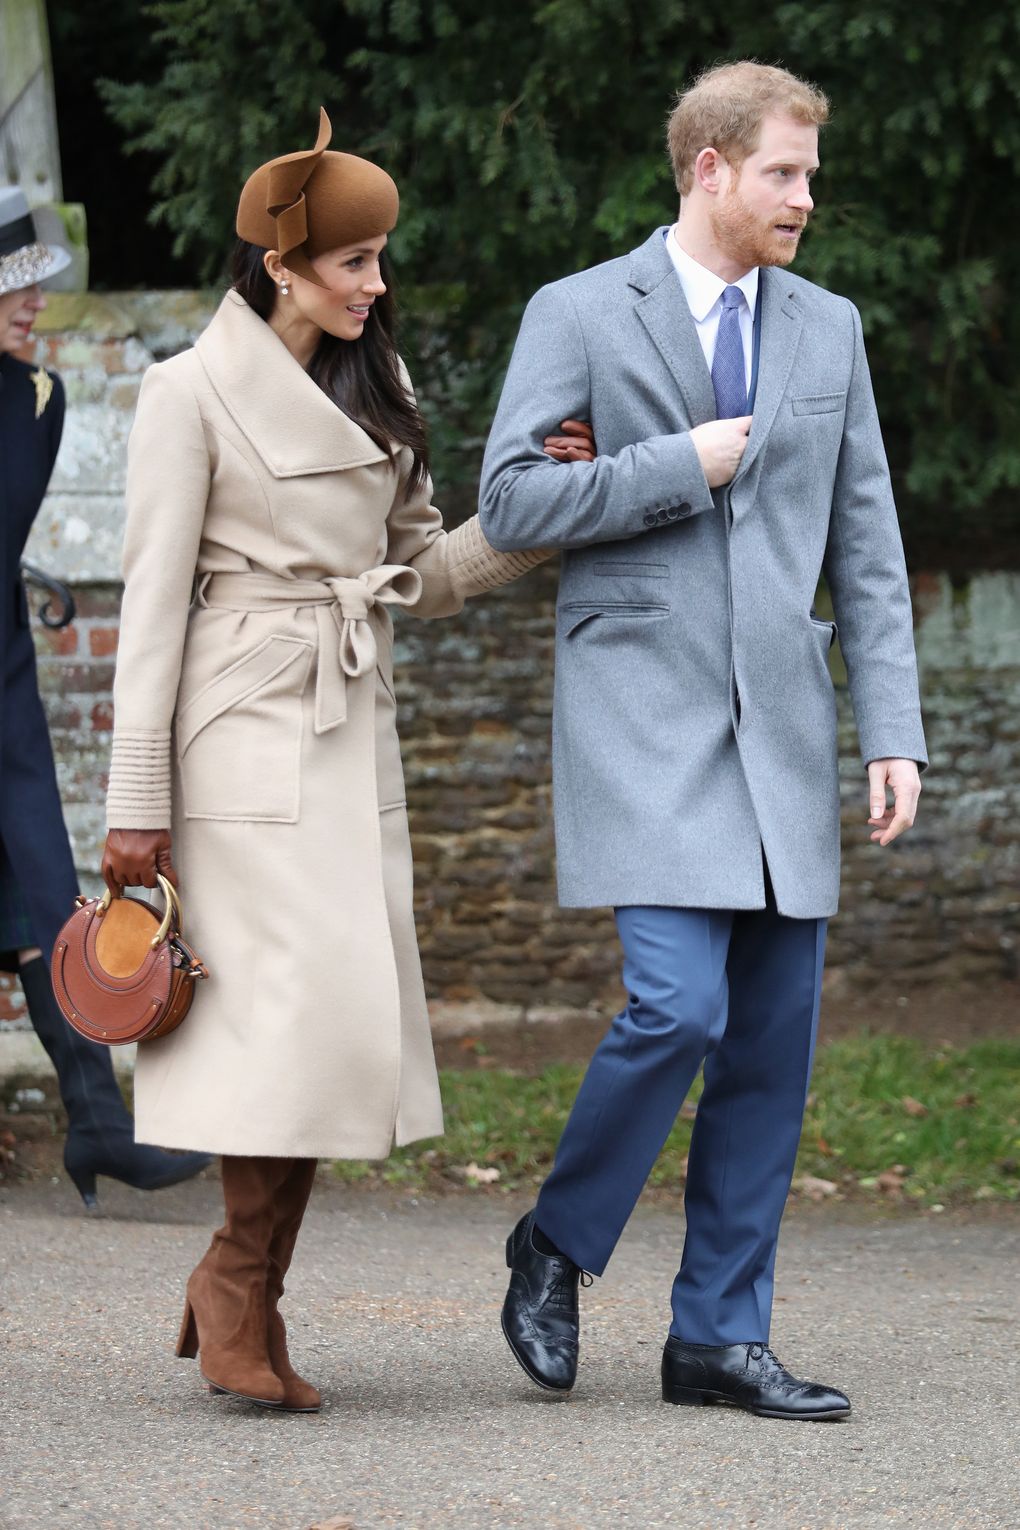 Members Of The Royal Family Attend St Mary Magdalene Church In SandringhamKING\'S LYNN, ENGLAND - DECEMBER 25: Meghan Markle and Prince Harry attend Christmas Day Church service at Church of St Mary Magdalene on December 25, 2017 in King\'s Lynn, England. (Photo by Chris Jackson/Getty Images)Chris Jackson